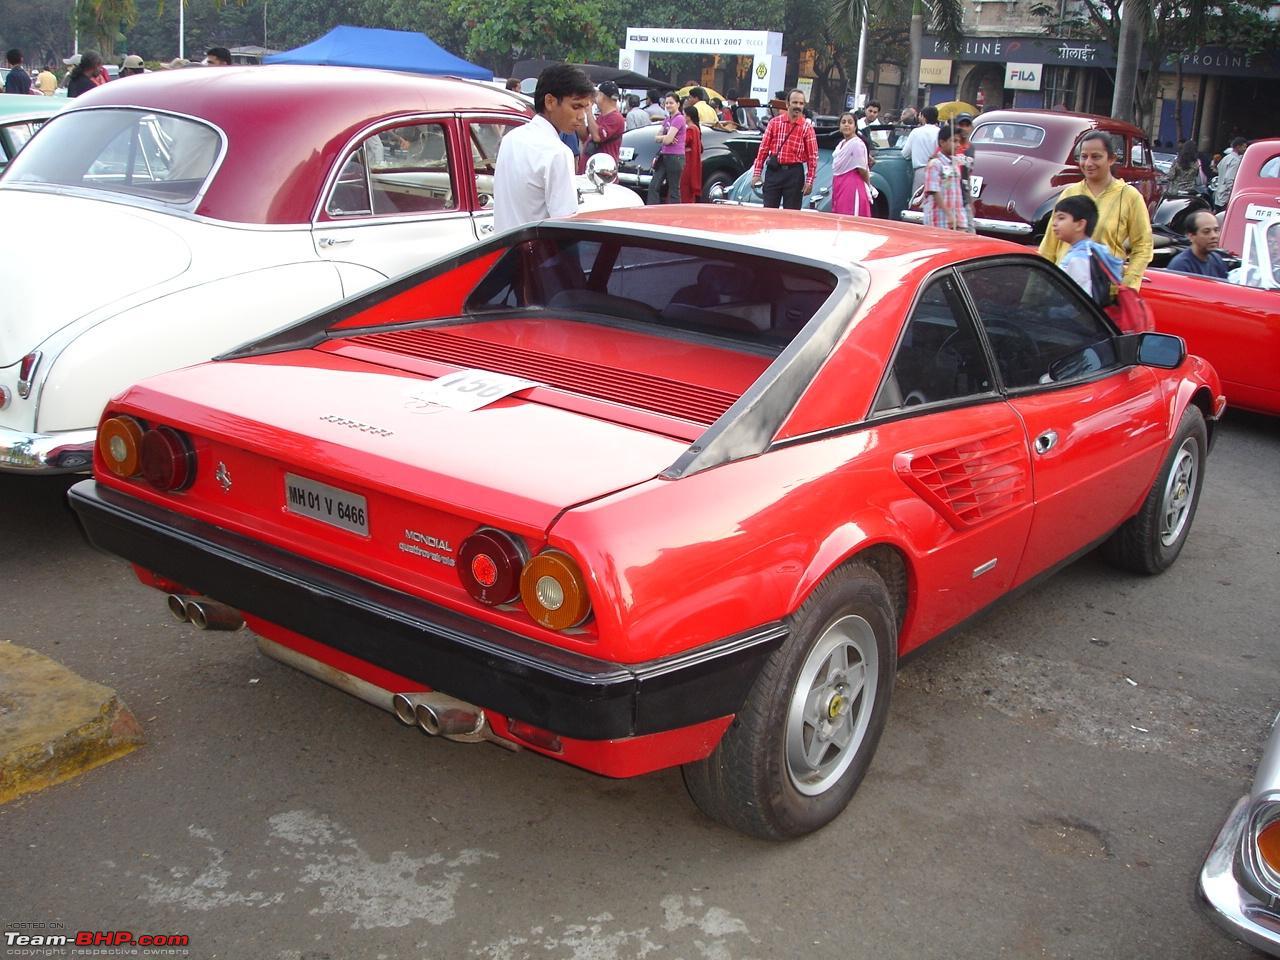 Pics : The Mondial - Yet Another Ferrari in Bombay. - Page 3 - Team-BHP